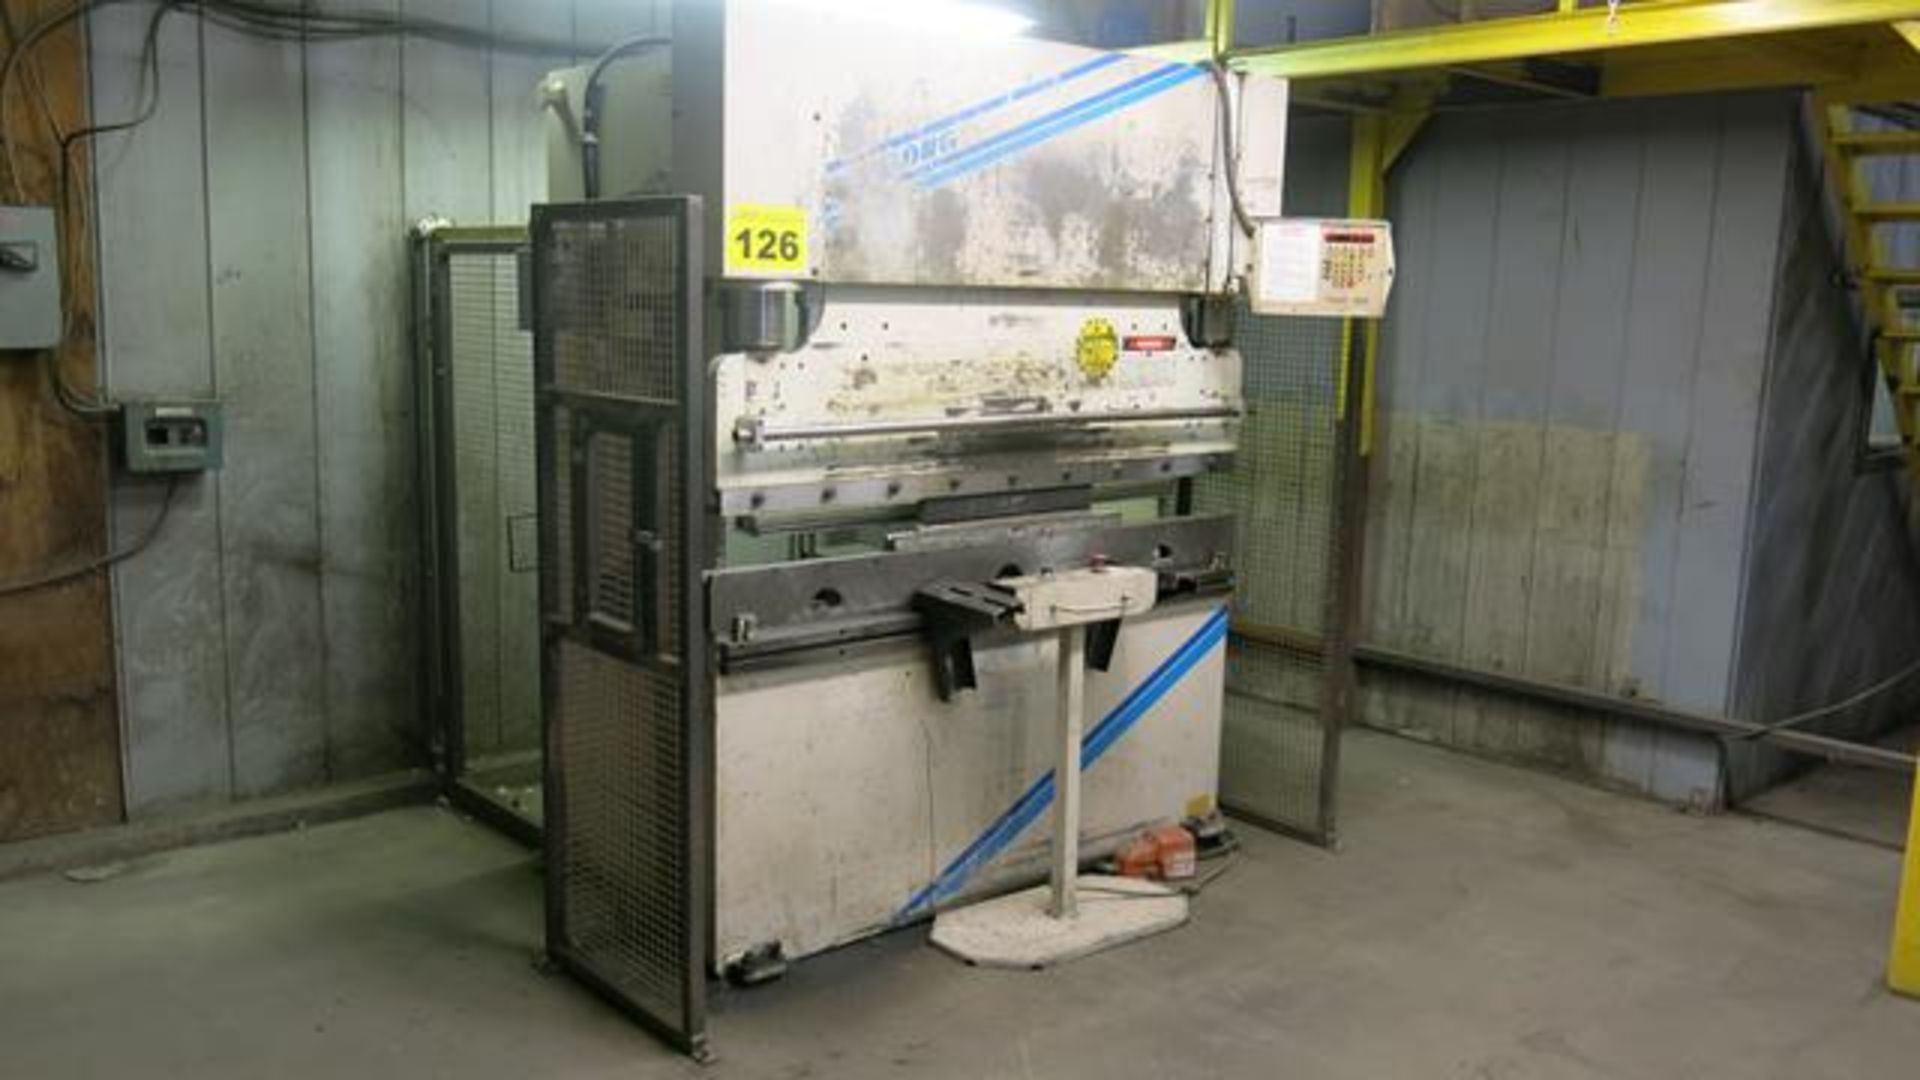 WYSONG, THS60-72, 60 TON X 6', PRESS BRAKE, CNC 99, 2-AXIS, AUTOGAUGE, S/N TH5-107 (RIGGING $1250) - Image 2 of 7